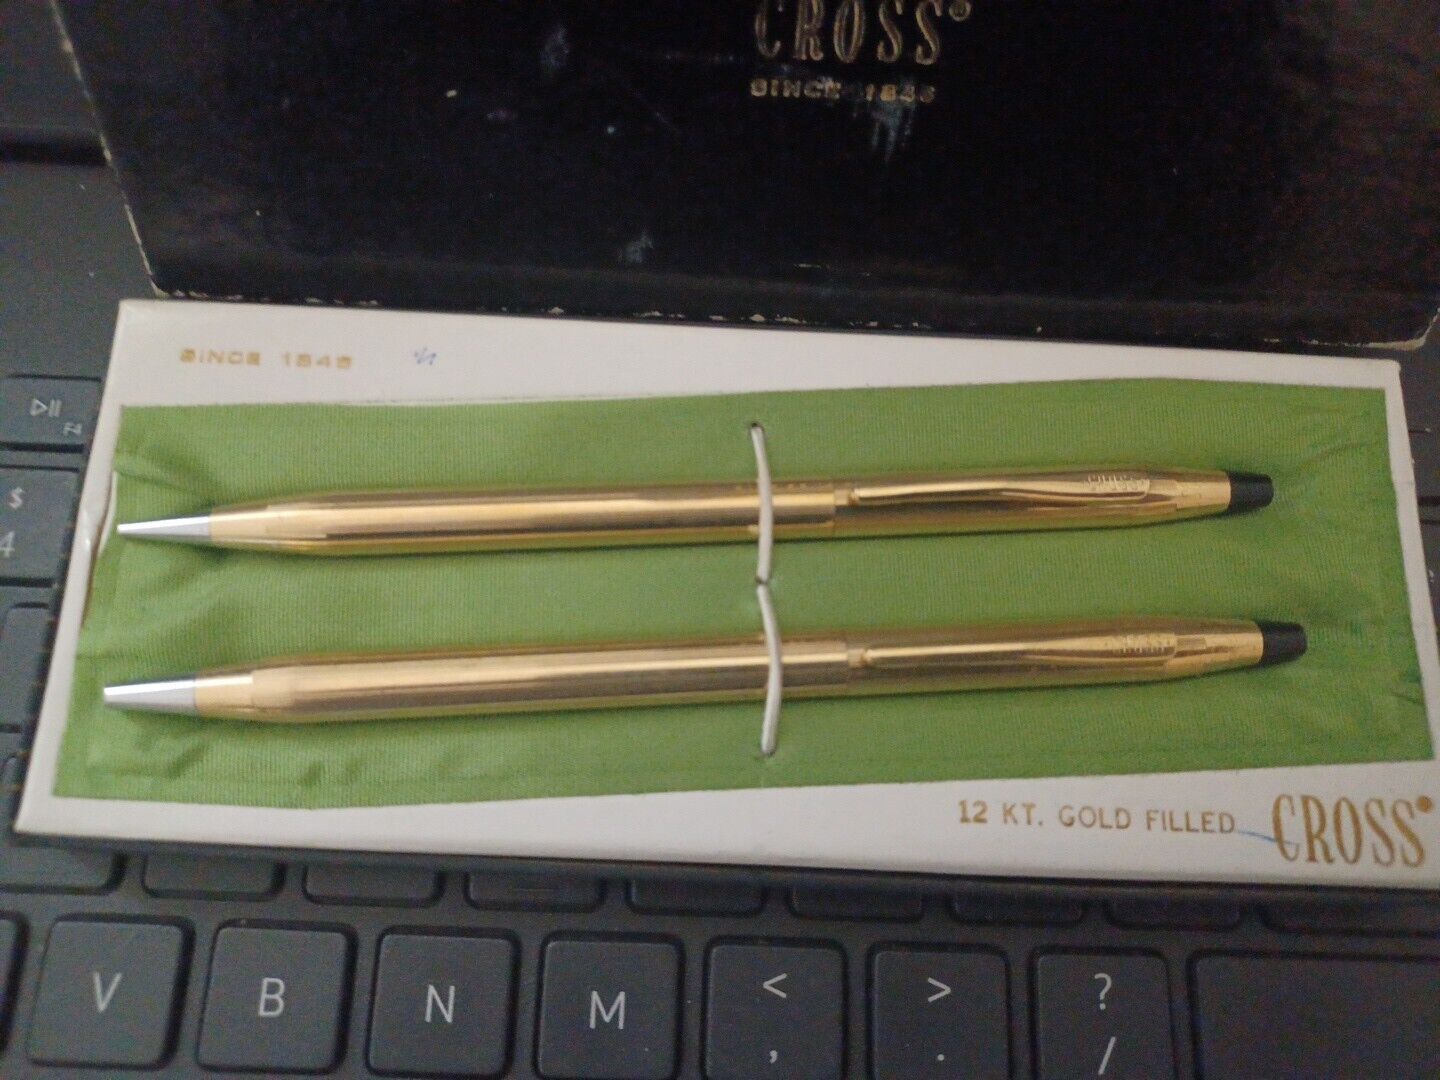 Vintage 12k Gold Filled Cross Ballpoint Pen Made In USA With Box